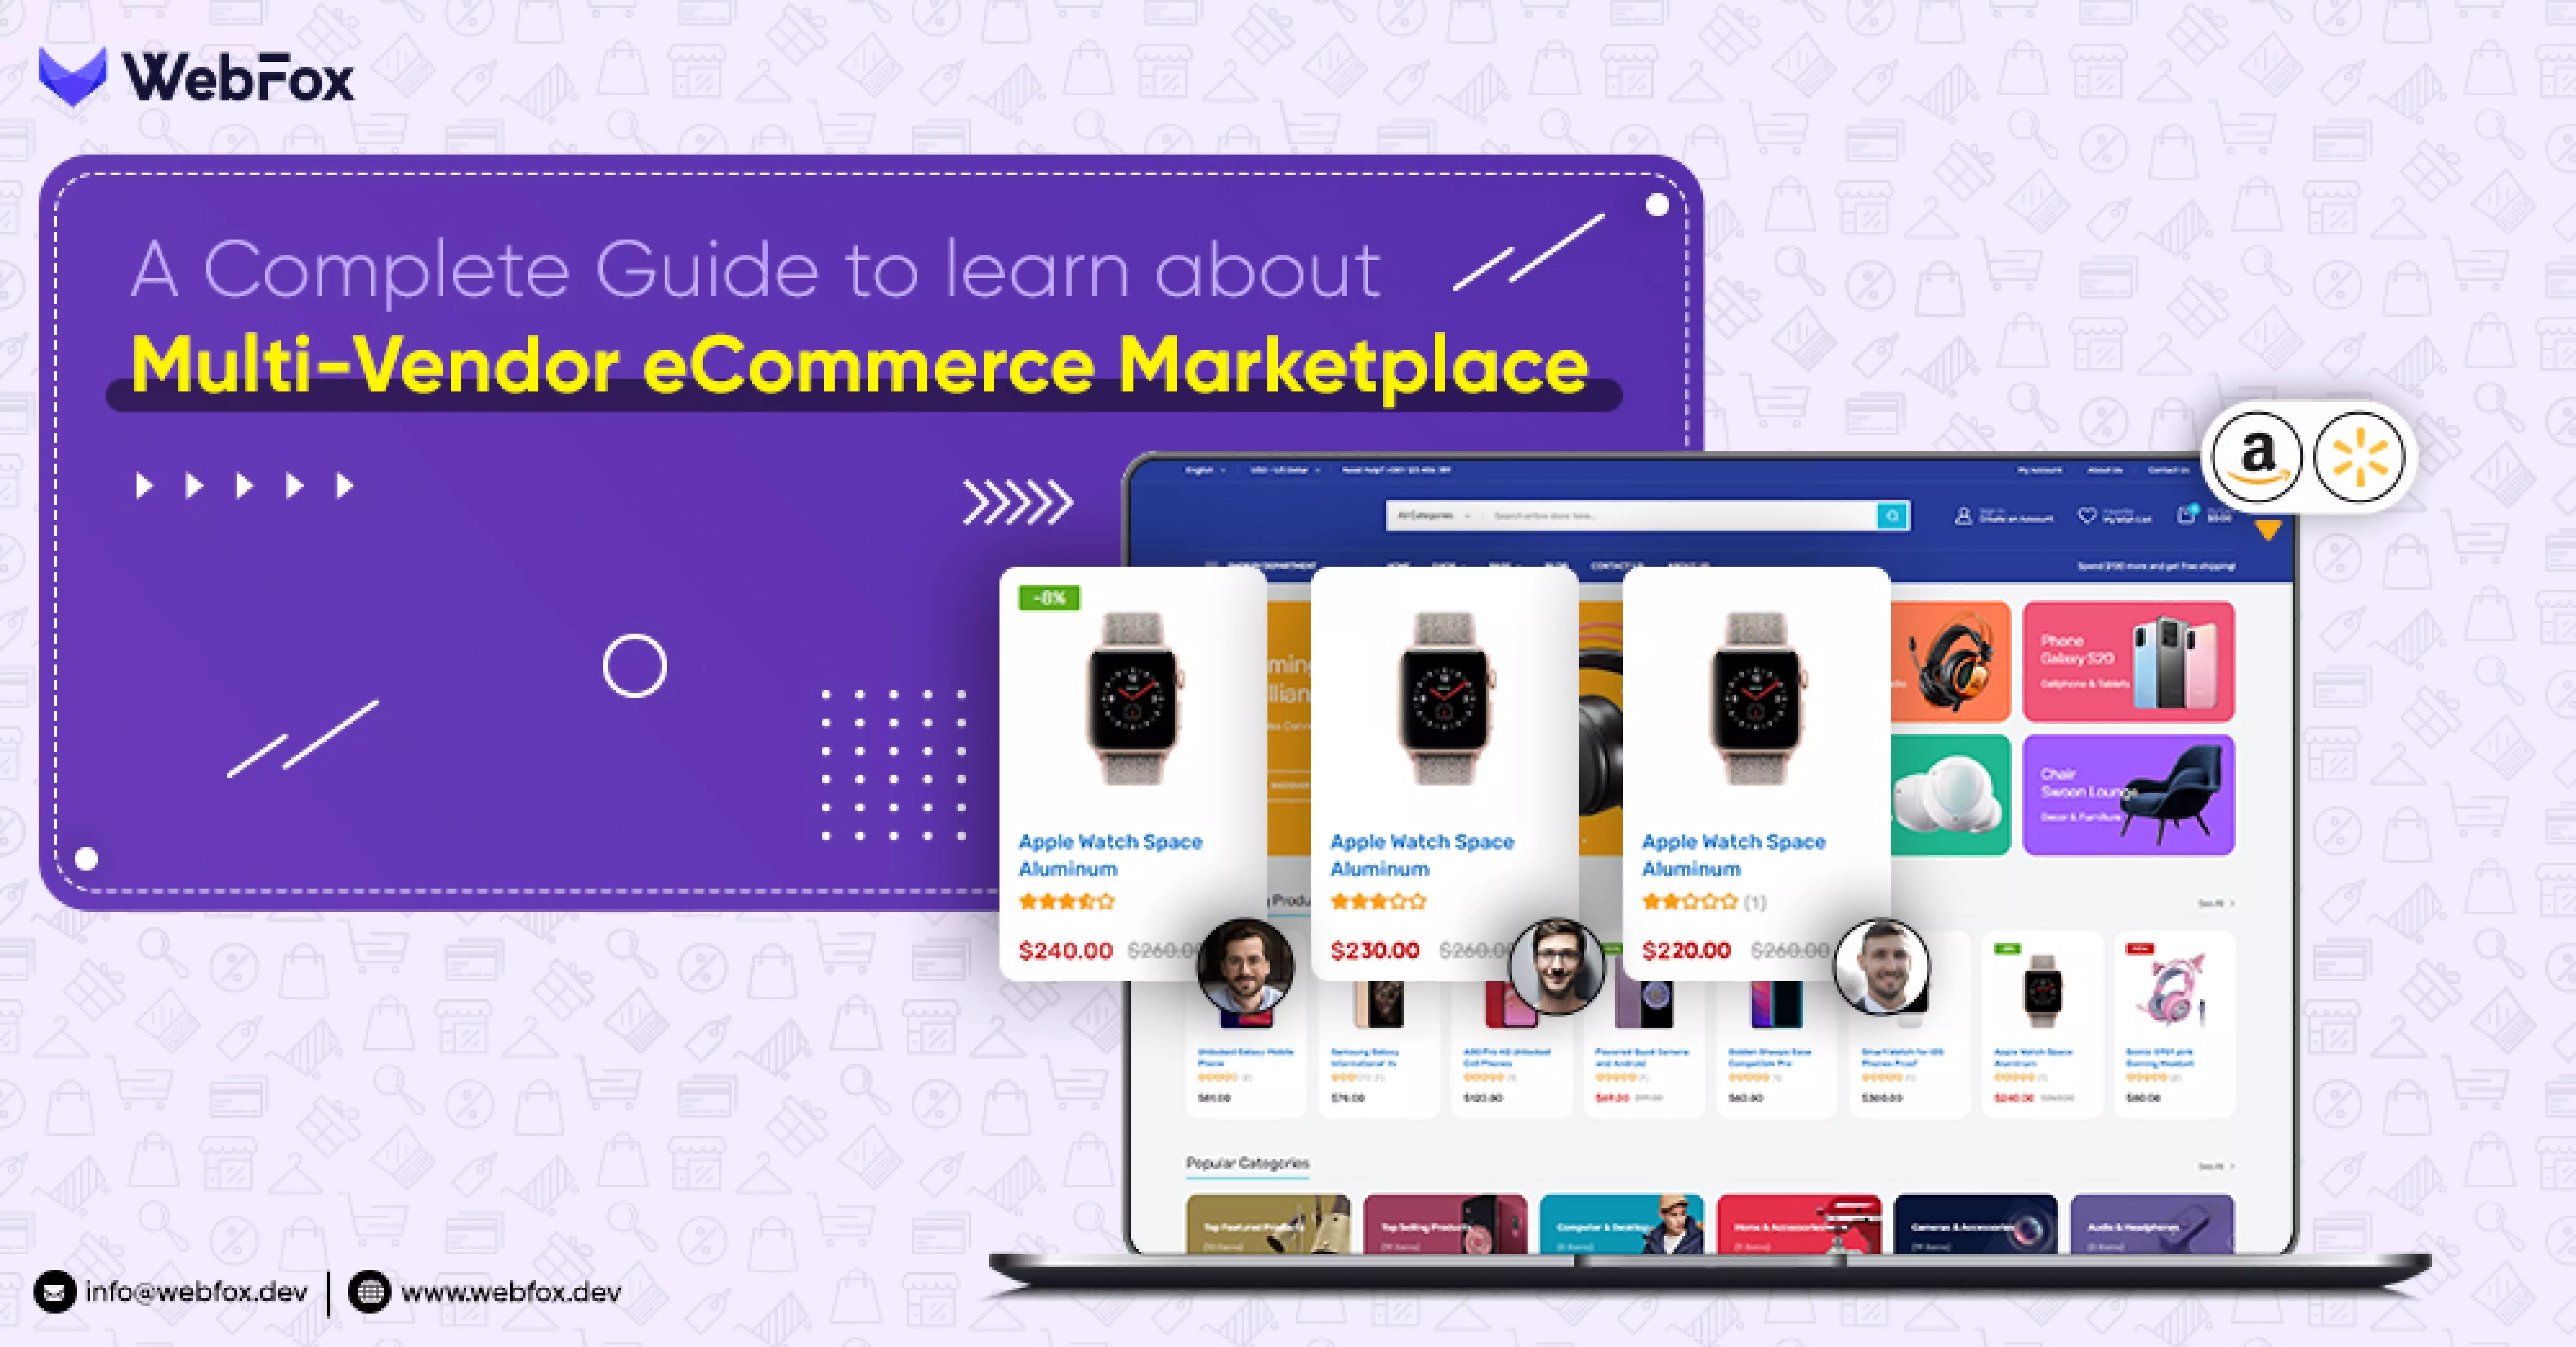 A Complete Guide to learn about Multi-Vendor e-commerce Marketplace